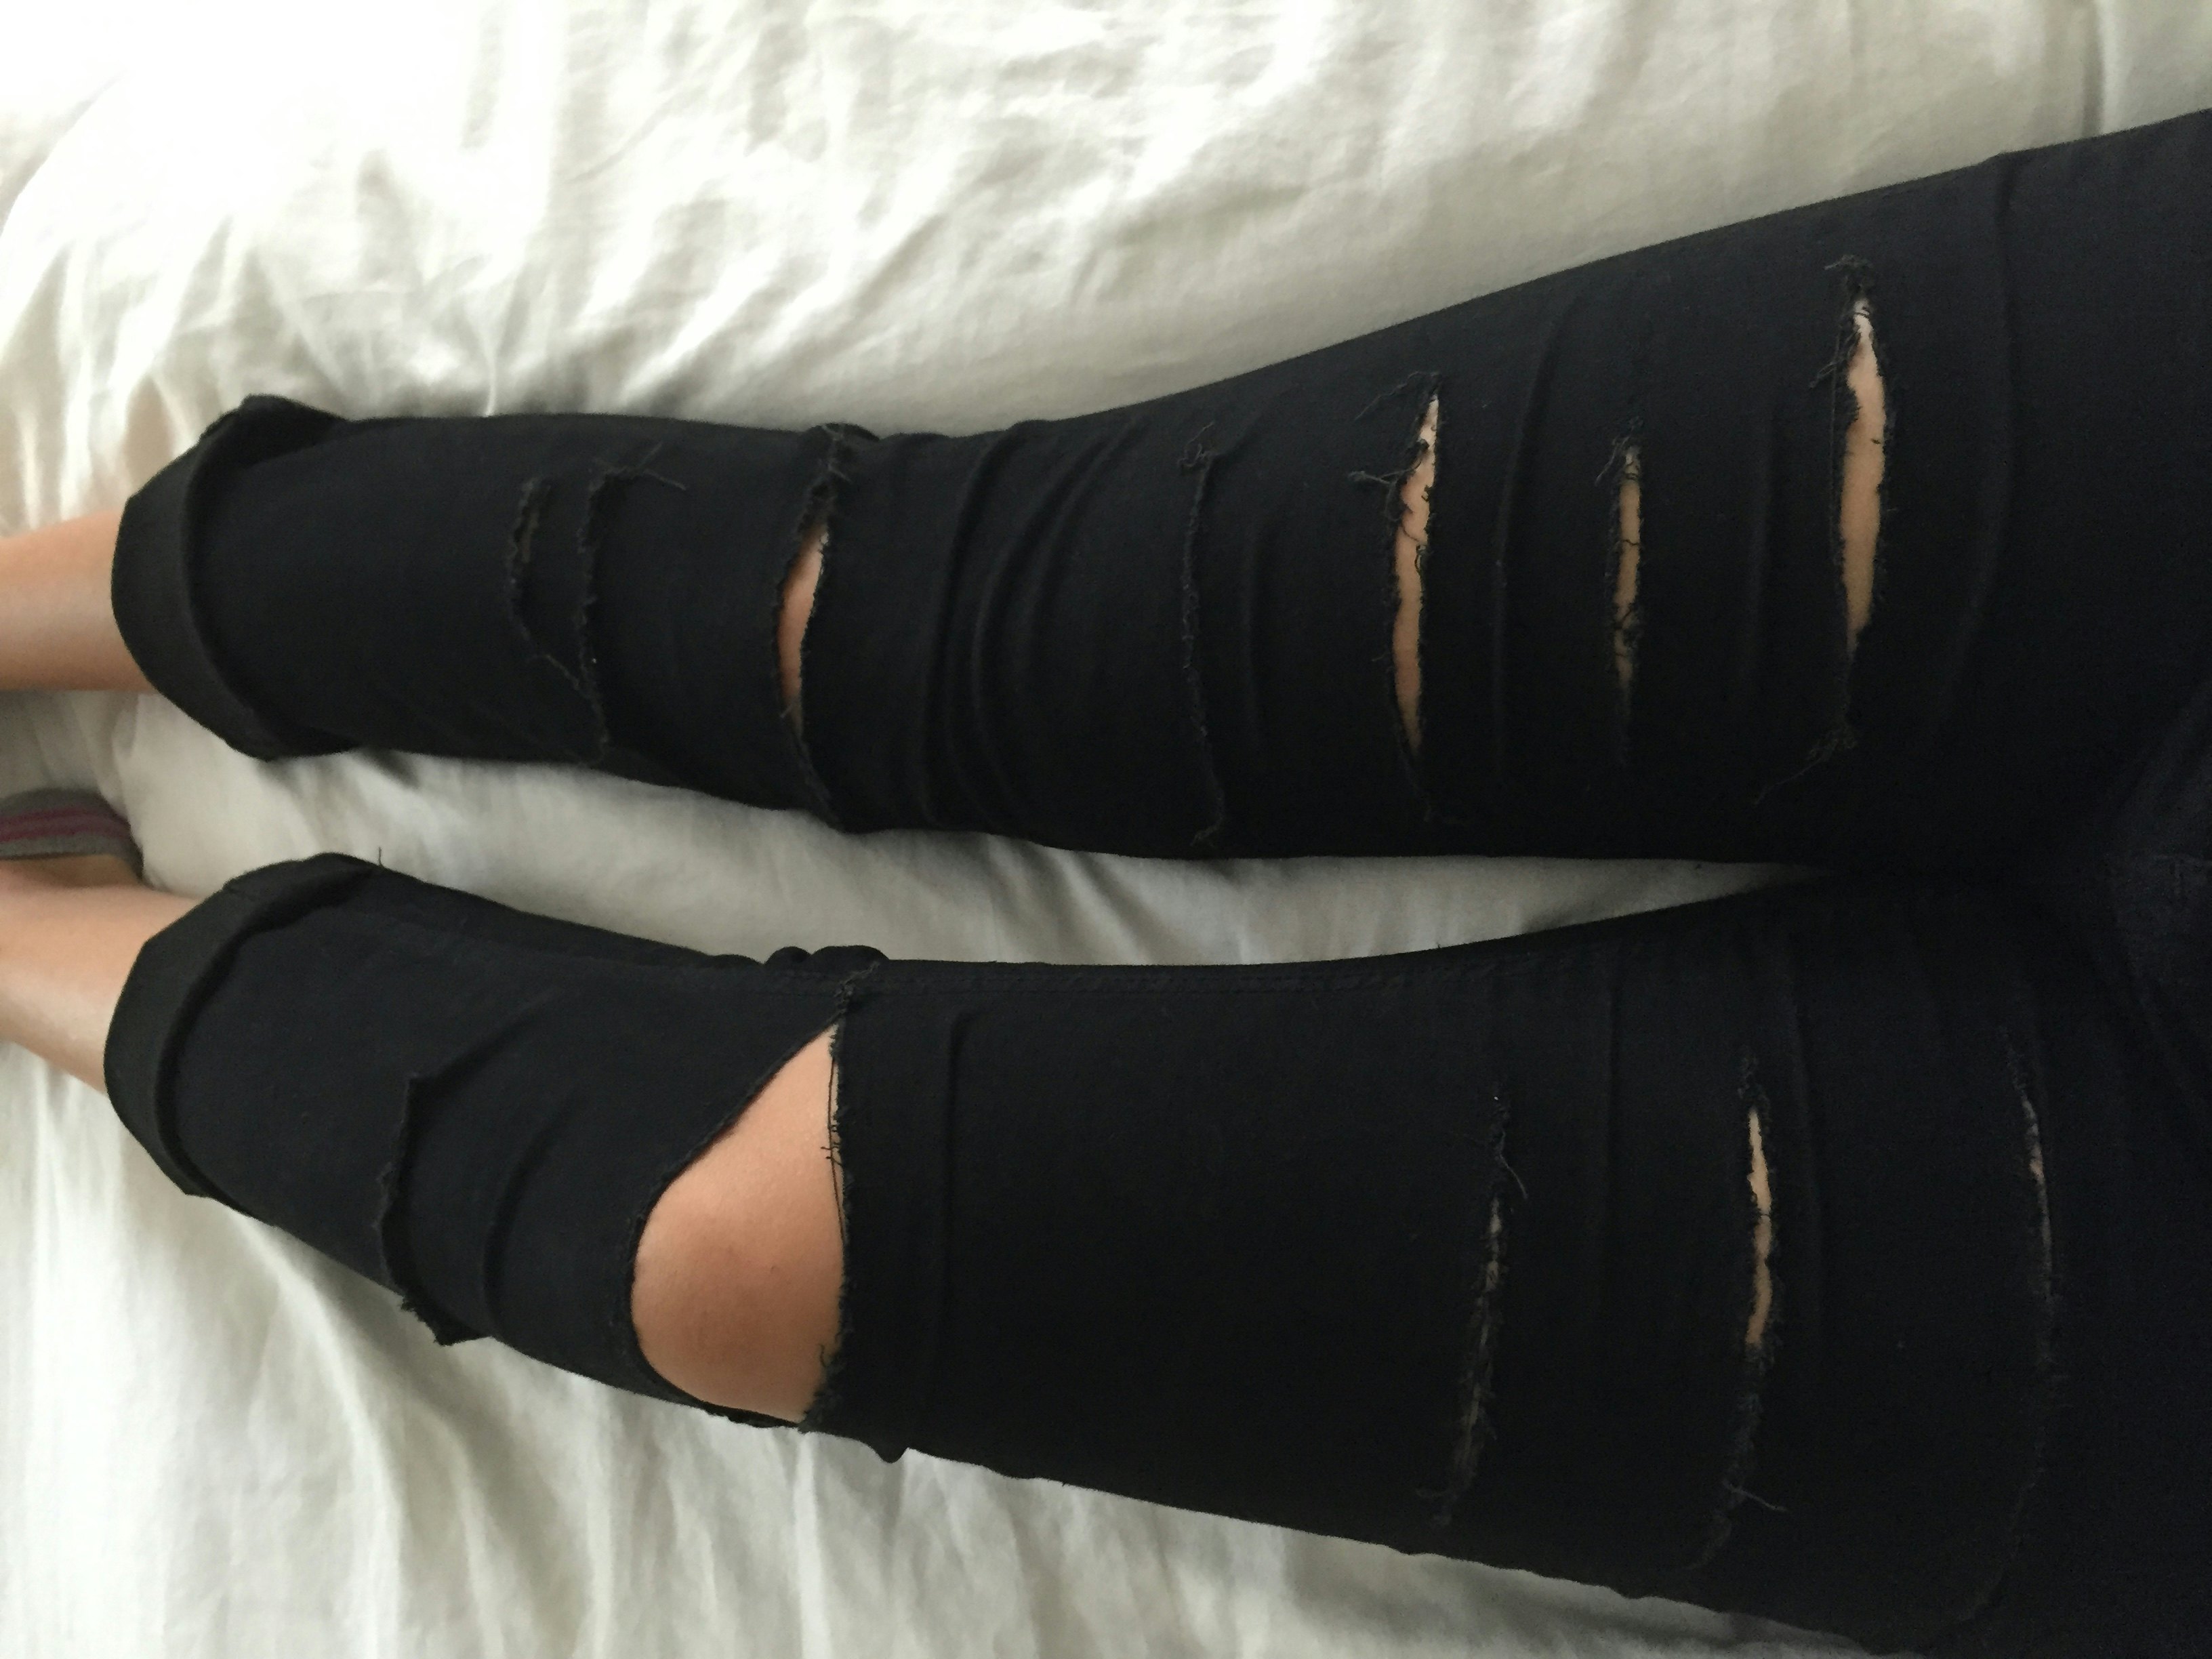 good places to get ripped jeans